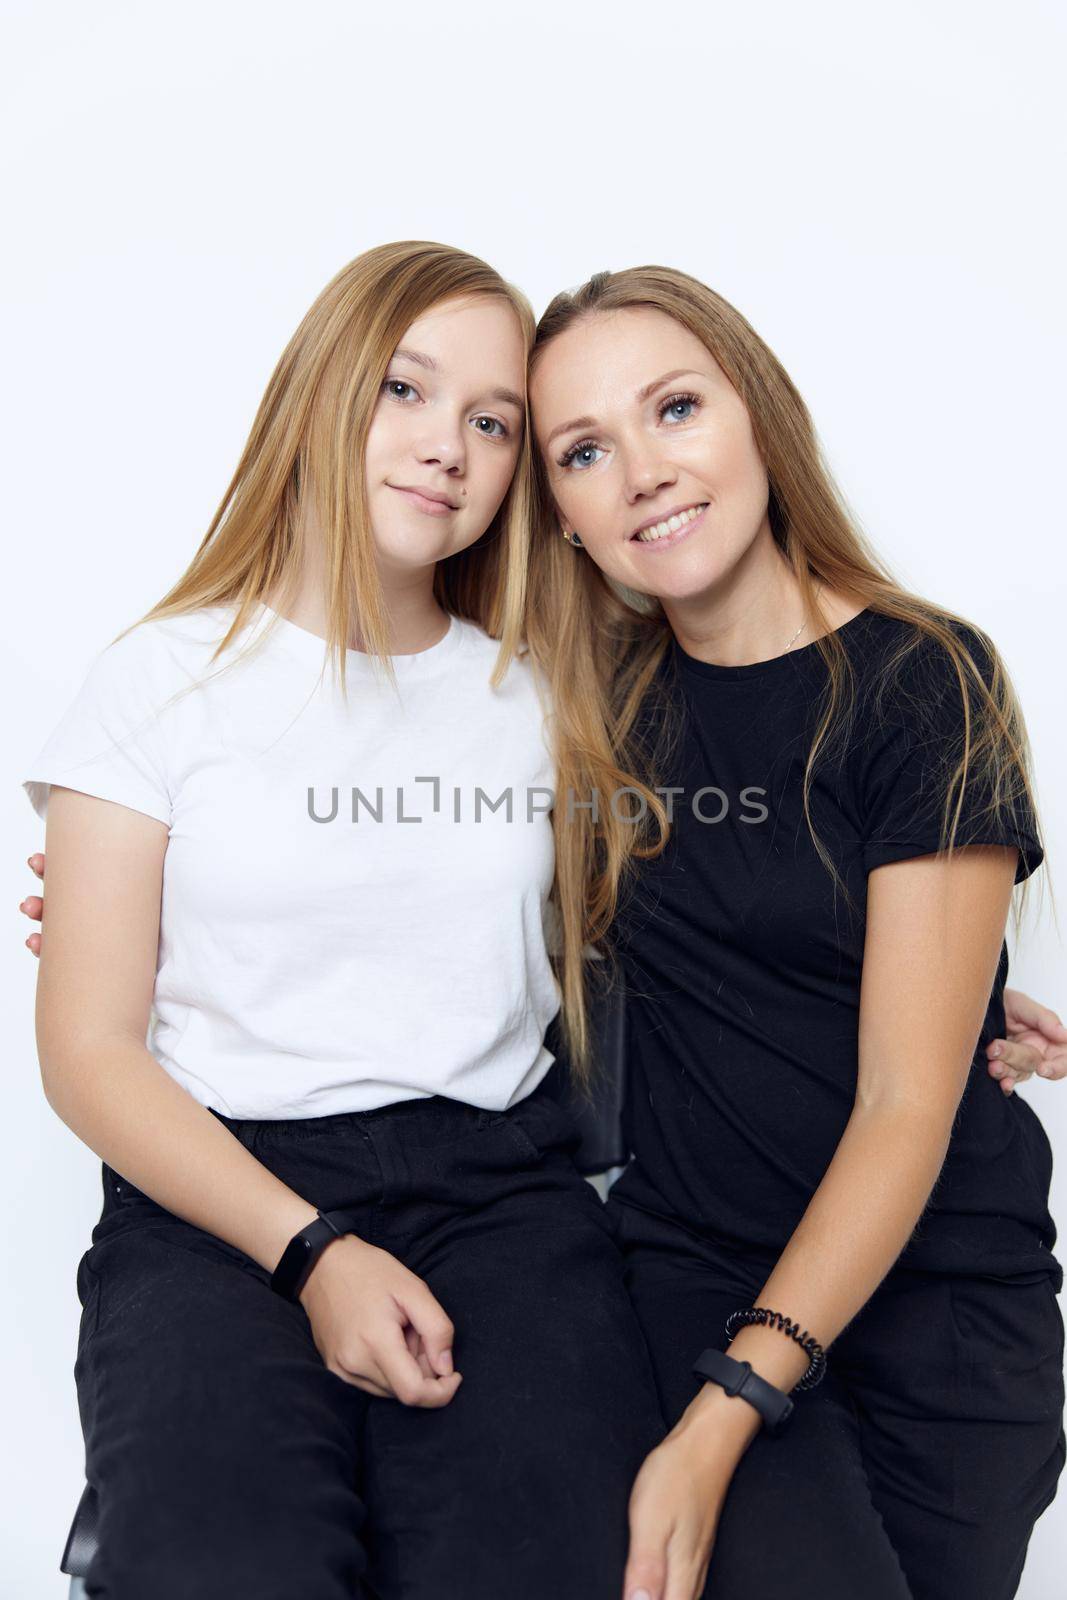 mom and daughter hug friendship studio isolated background by SHOTPRIME